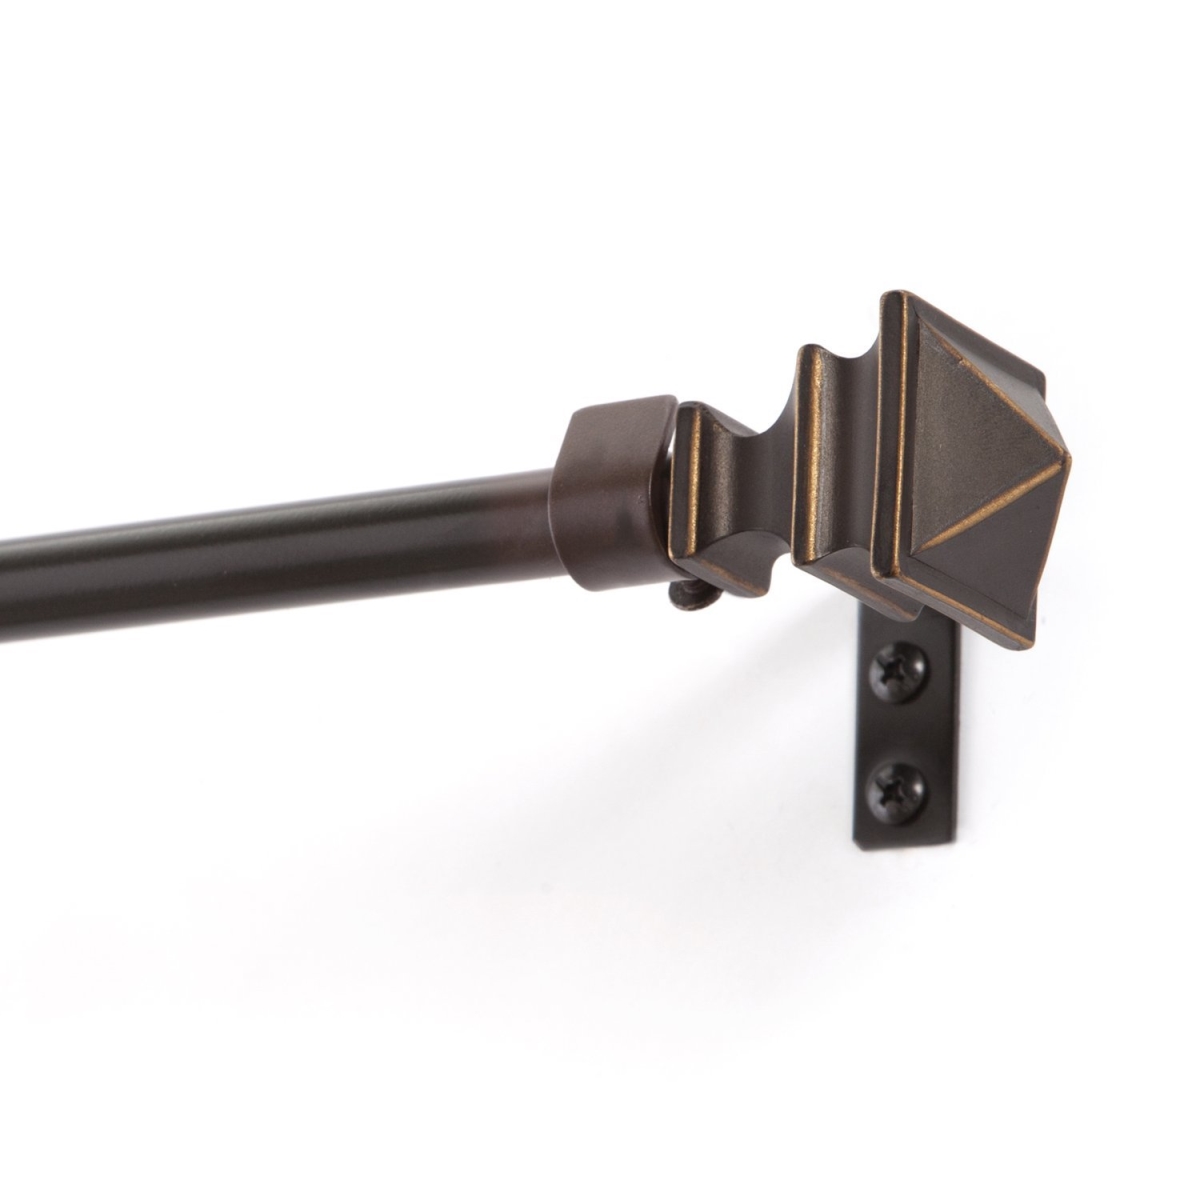 32-lwf1004-3orb 88-144 In. Painted Oil Rubbed Bronze Finish Single Rod Window Hardware With Square Resin Finial